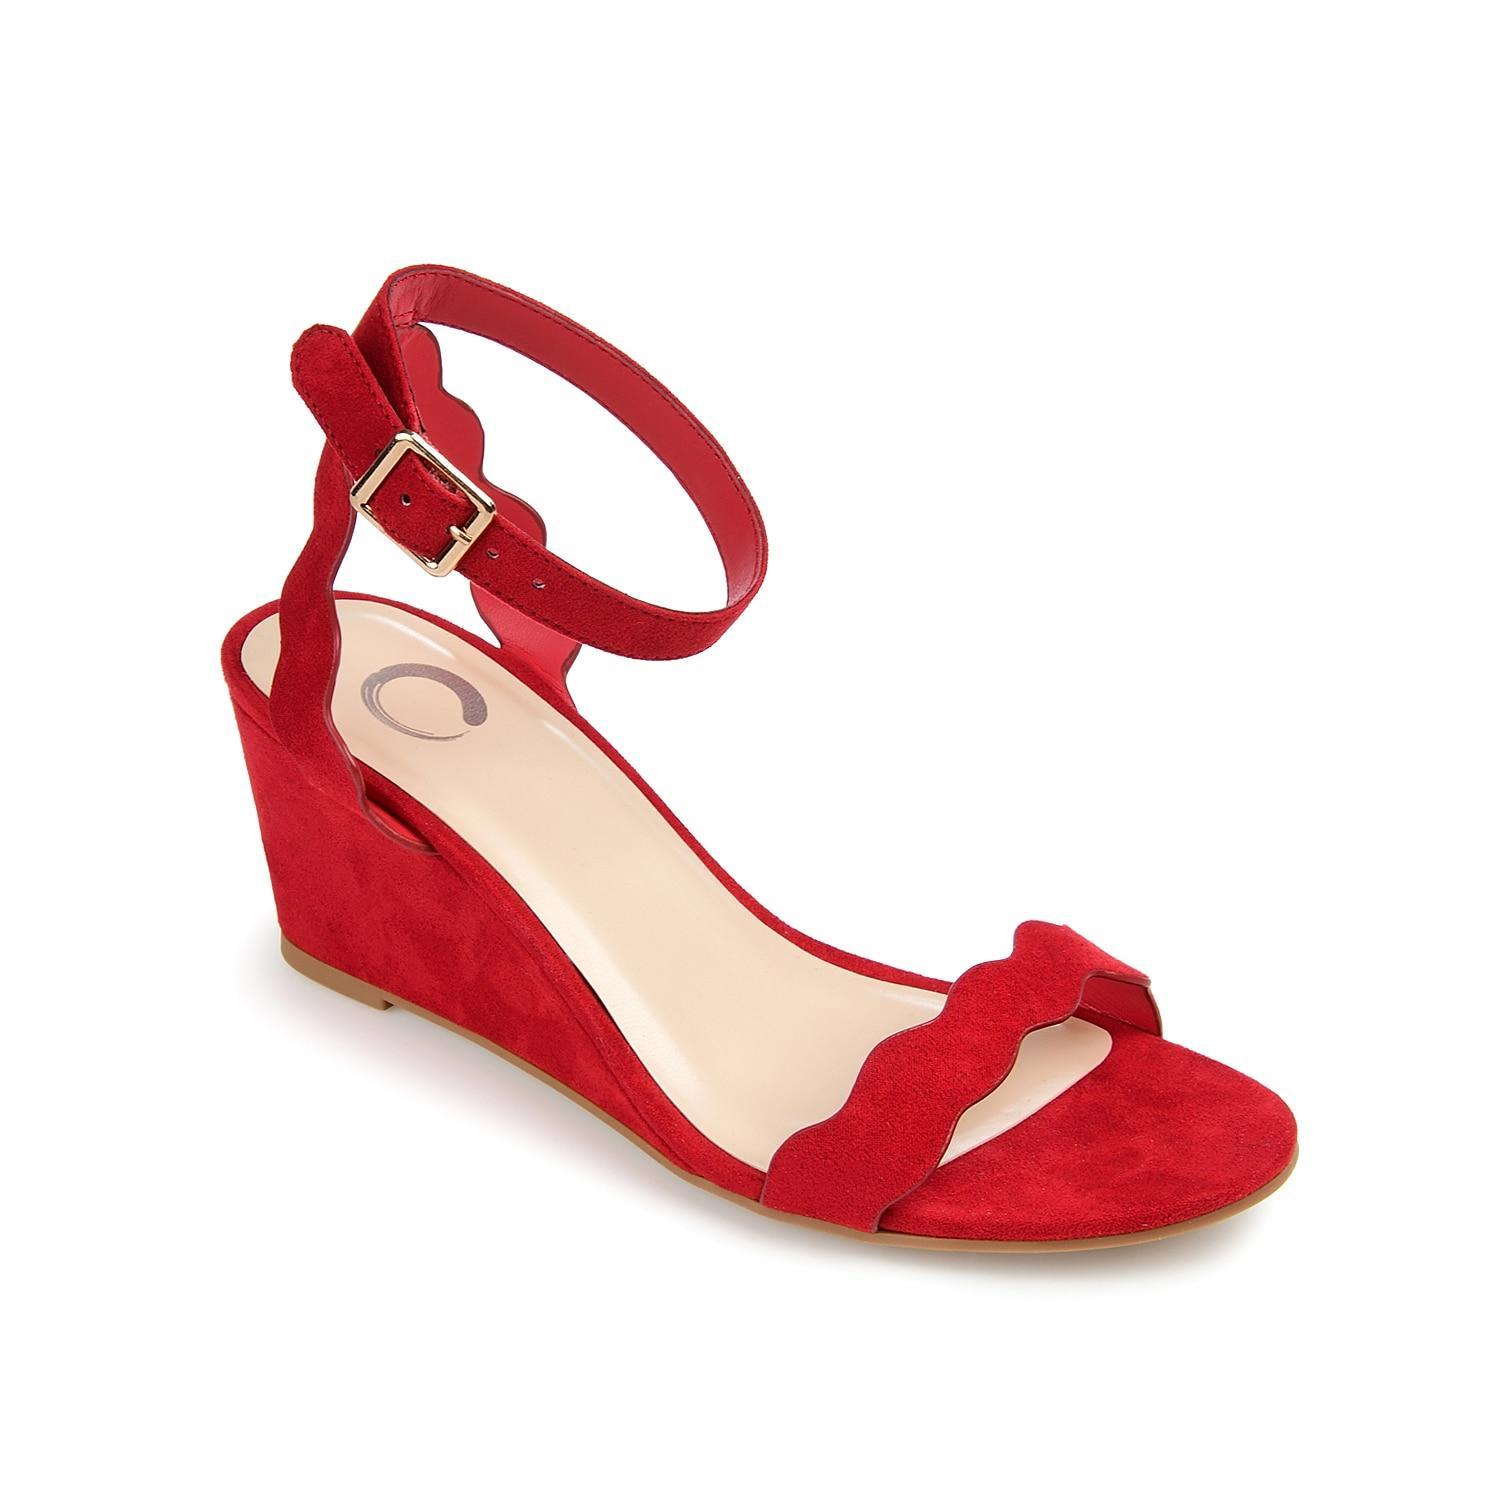 Journee Collection Loucia Womens Wedge Sandals Red Product Image